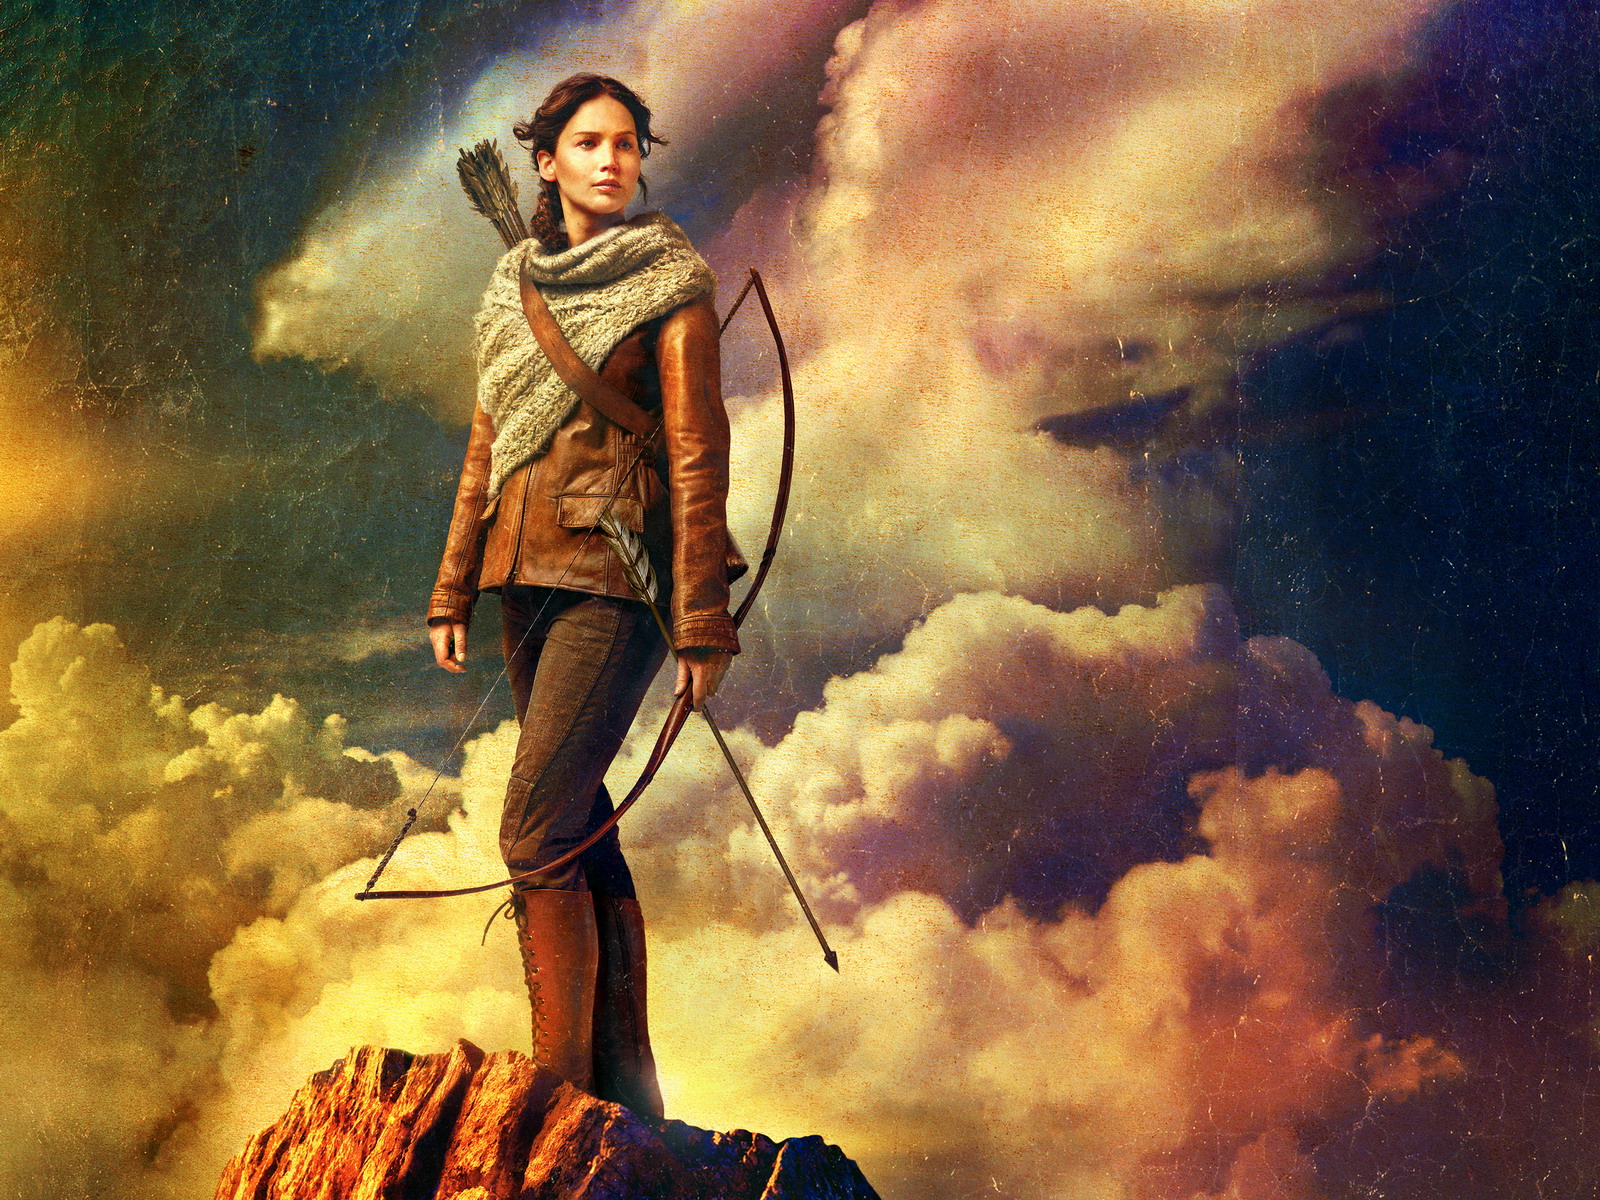 Download HQ The Hunger Games Catching Fire wallpaper / Movies / 1600x1200